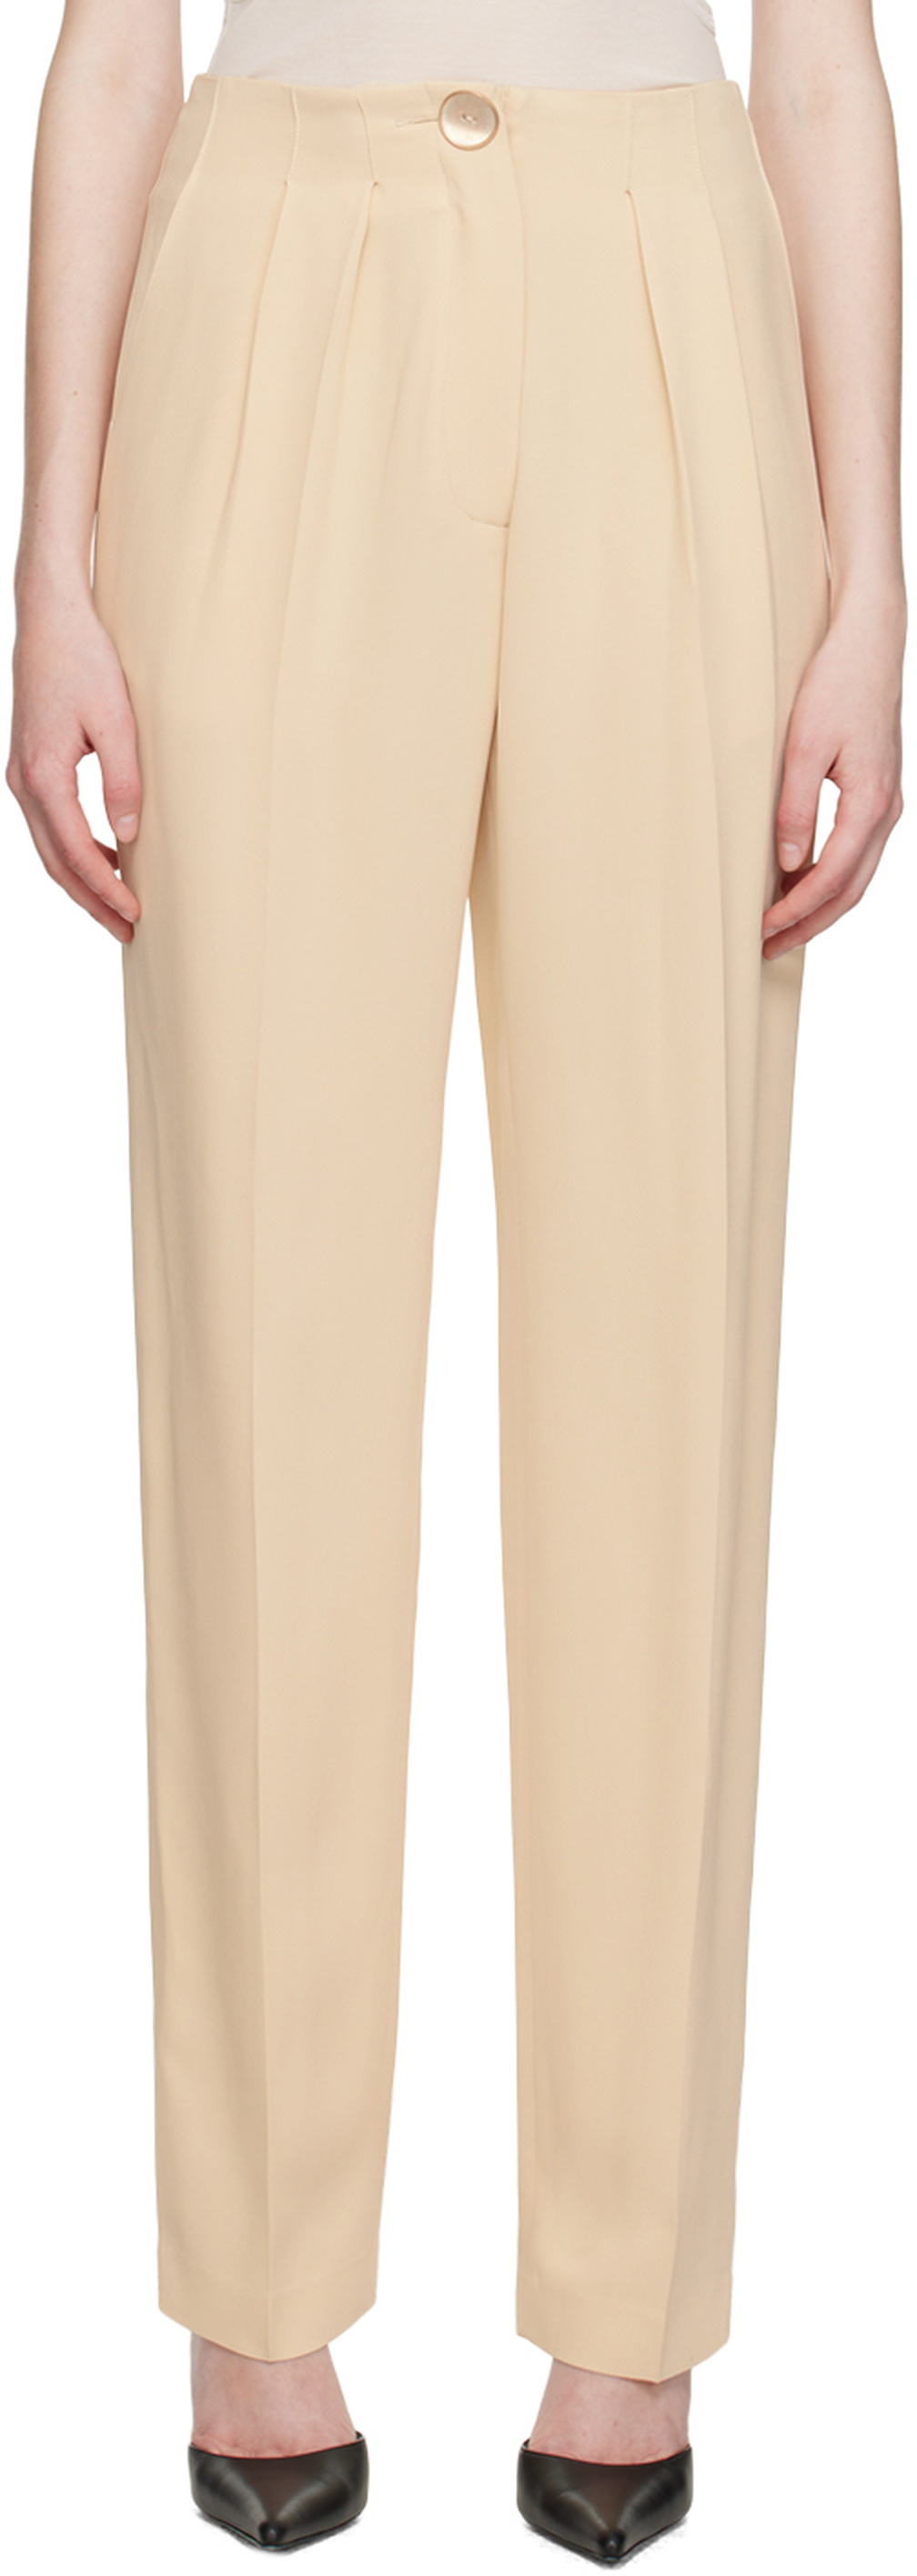 Maiden Name Beige Lila Trousers Maiden Name